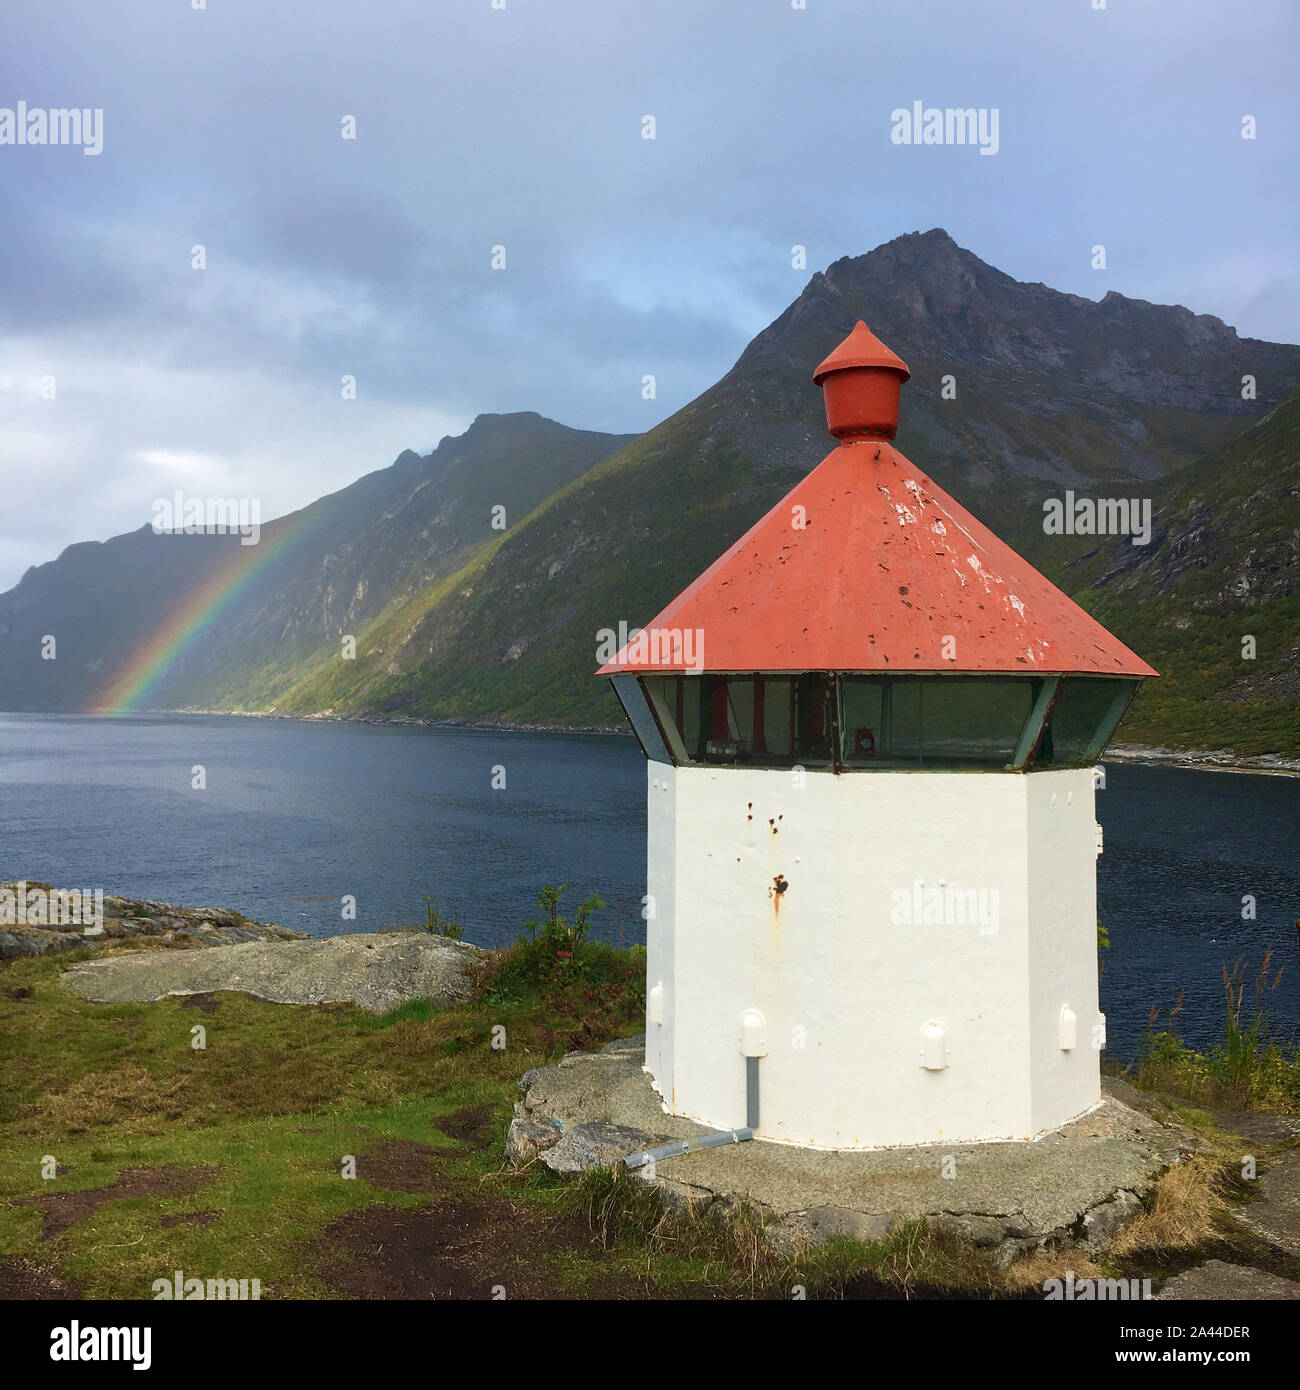 A magical moment. In the background, a rainbow appears and the gigantic mountains fit in with it. Stock Photo